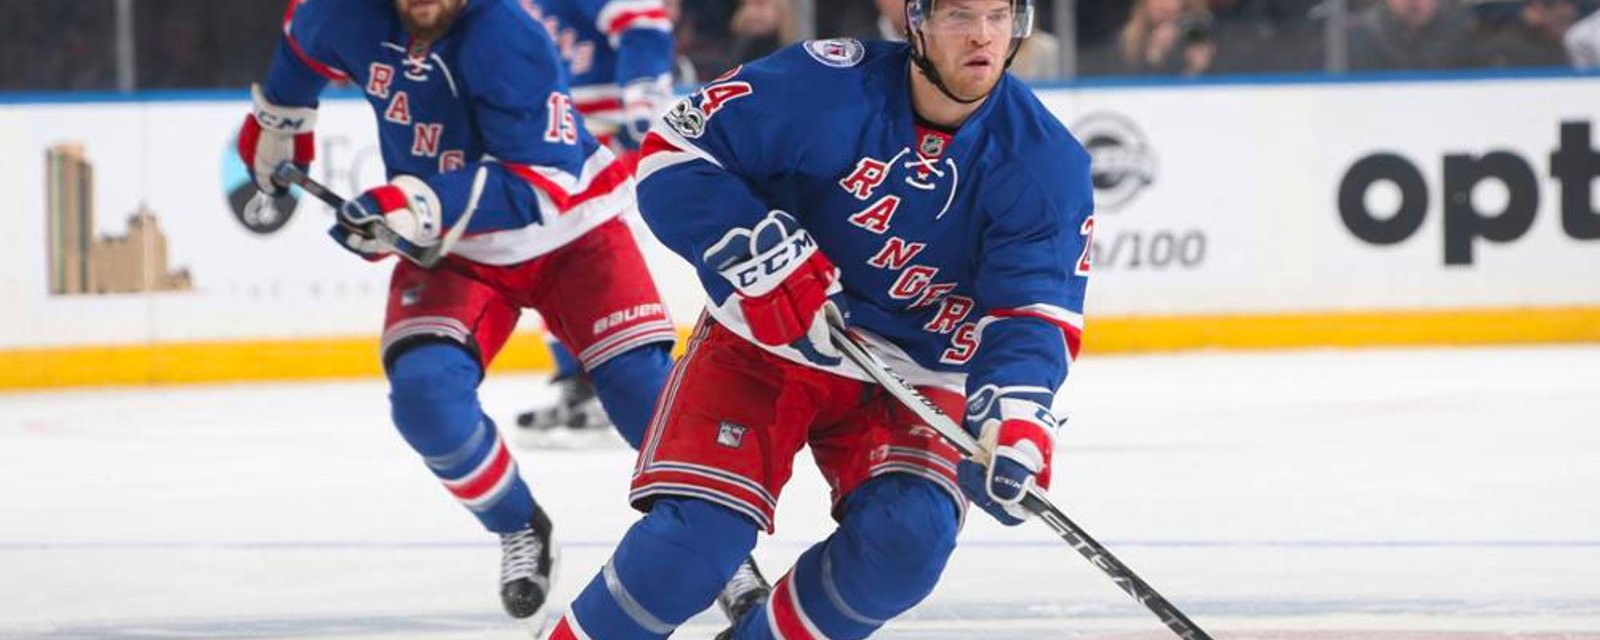 Former Rangers, Sens and Knights forward Oscar Lindberg signs a new contract